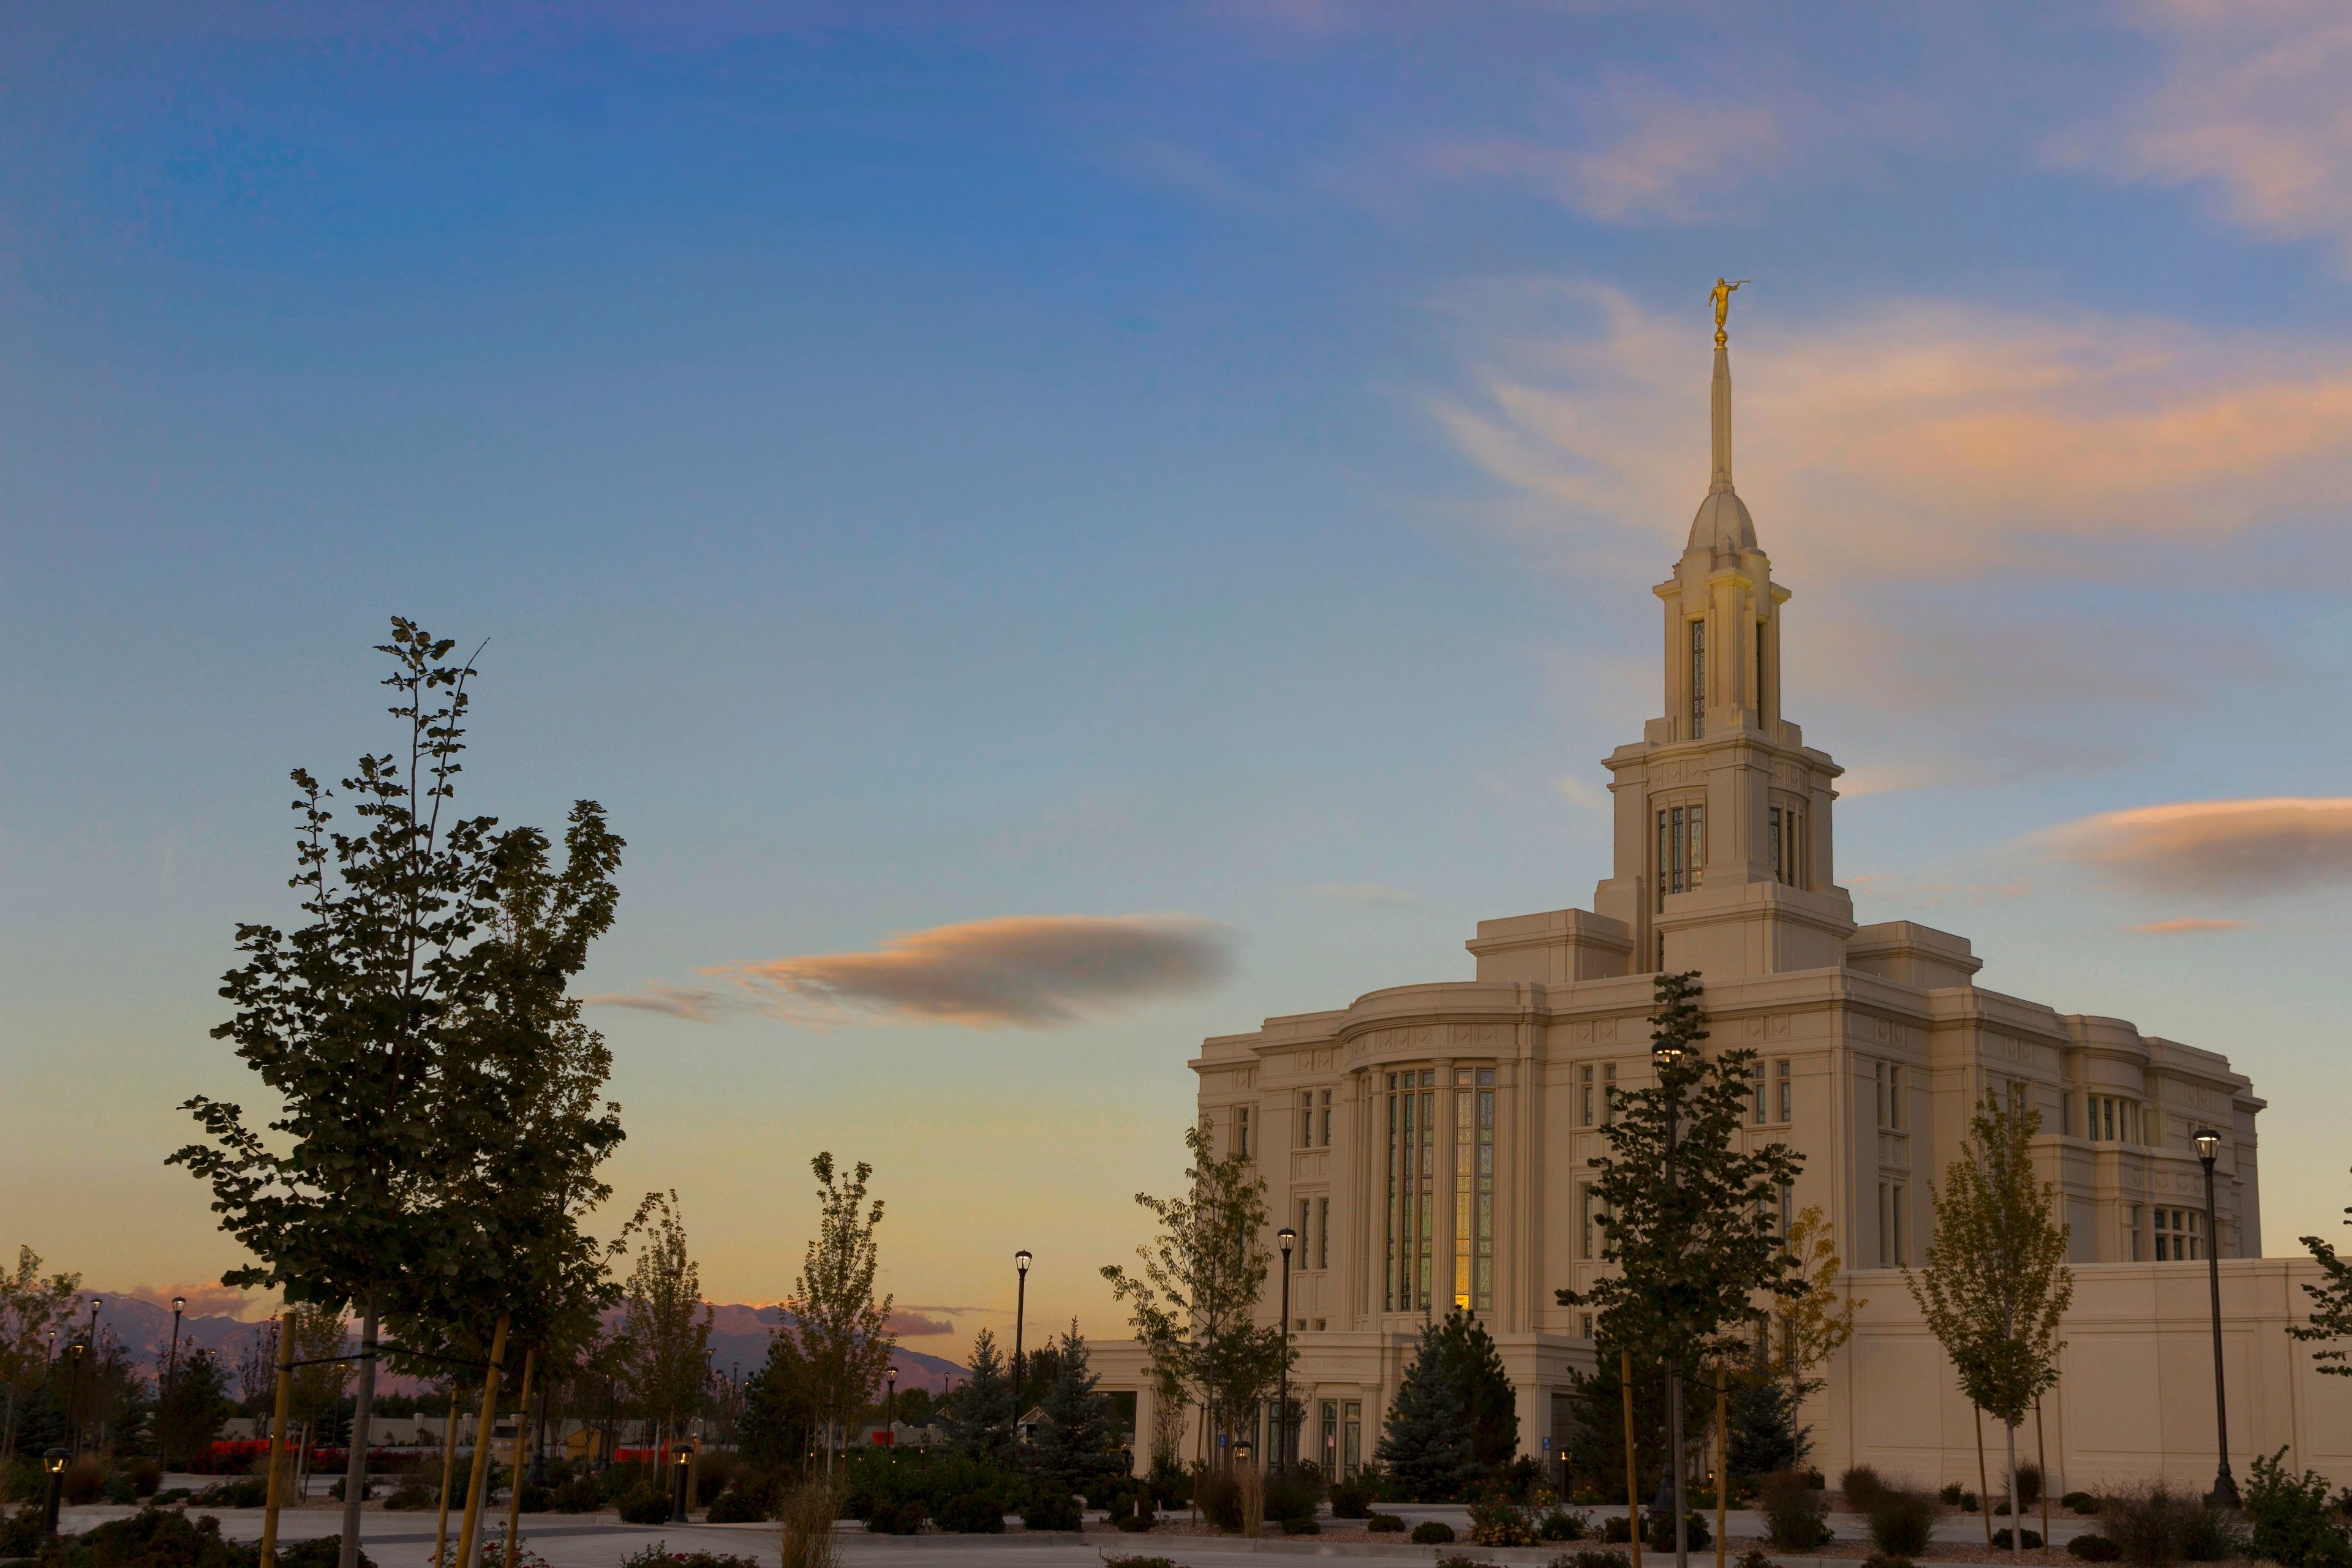 A side view of the Payson Utah Temple during the evening, including scenery.  